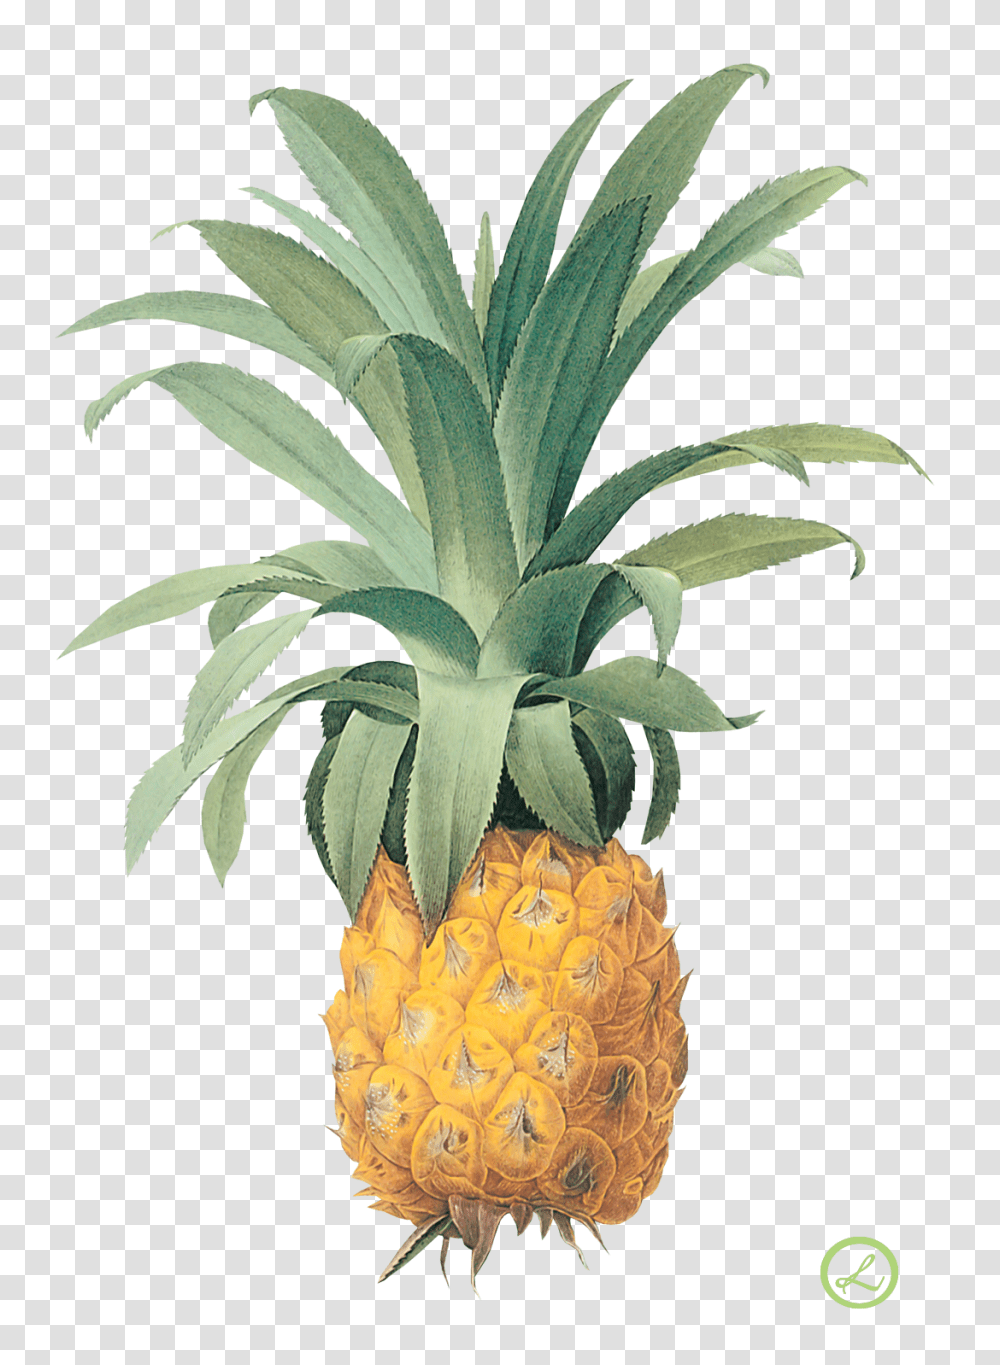 Background Pierre Joseph Redoute Prints Fruits Ananas, Plant, Pineapple, Food, Produce Transparent Png